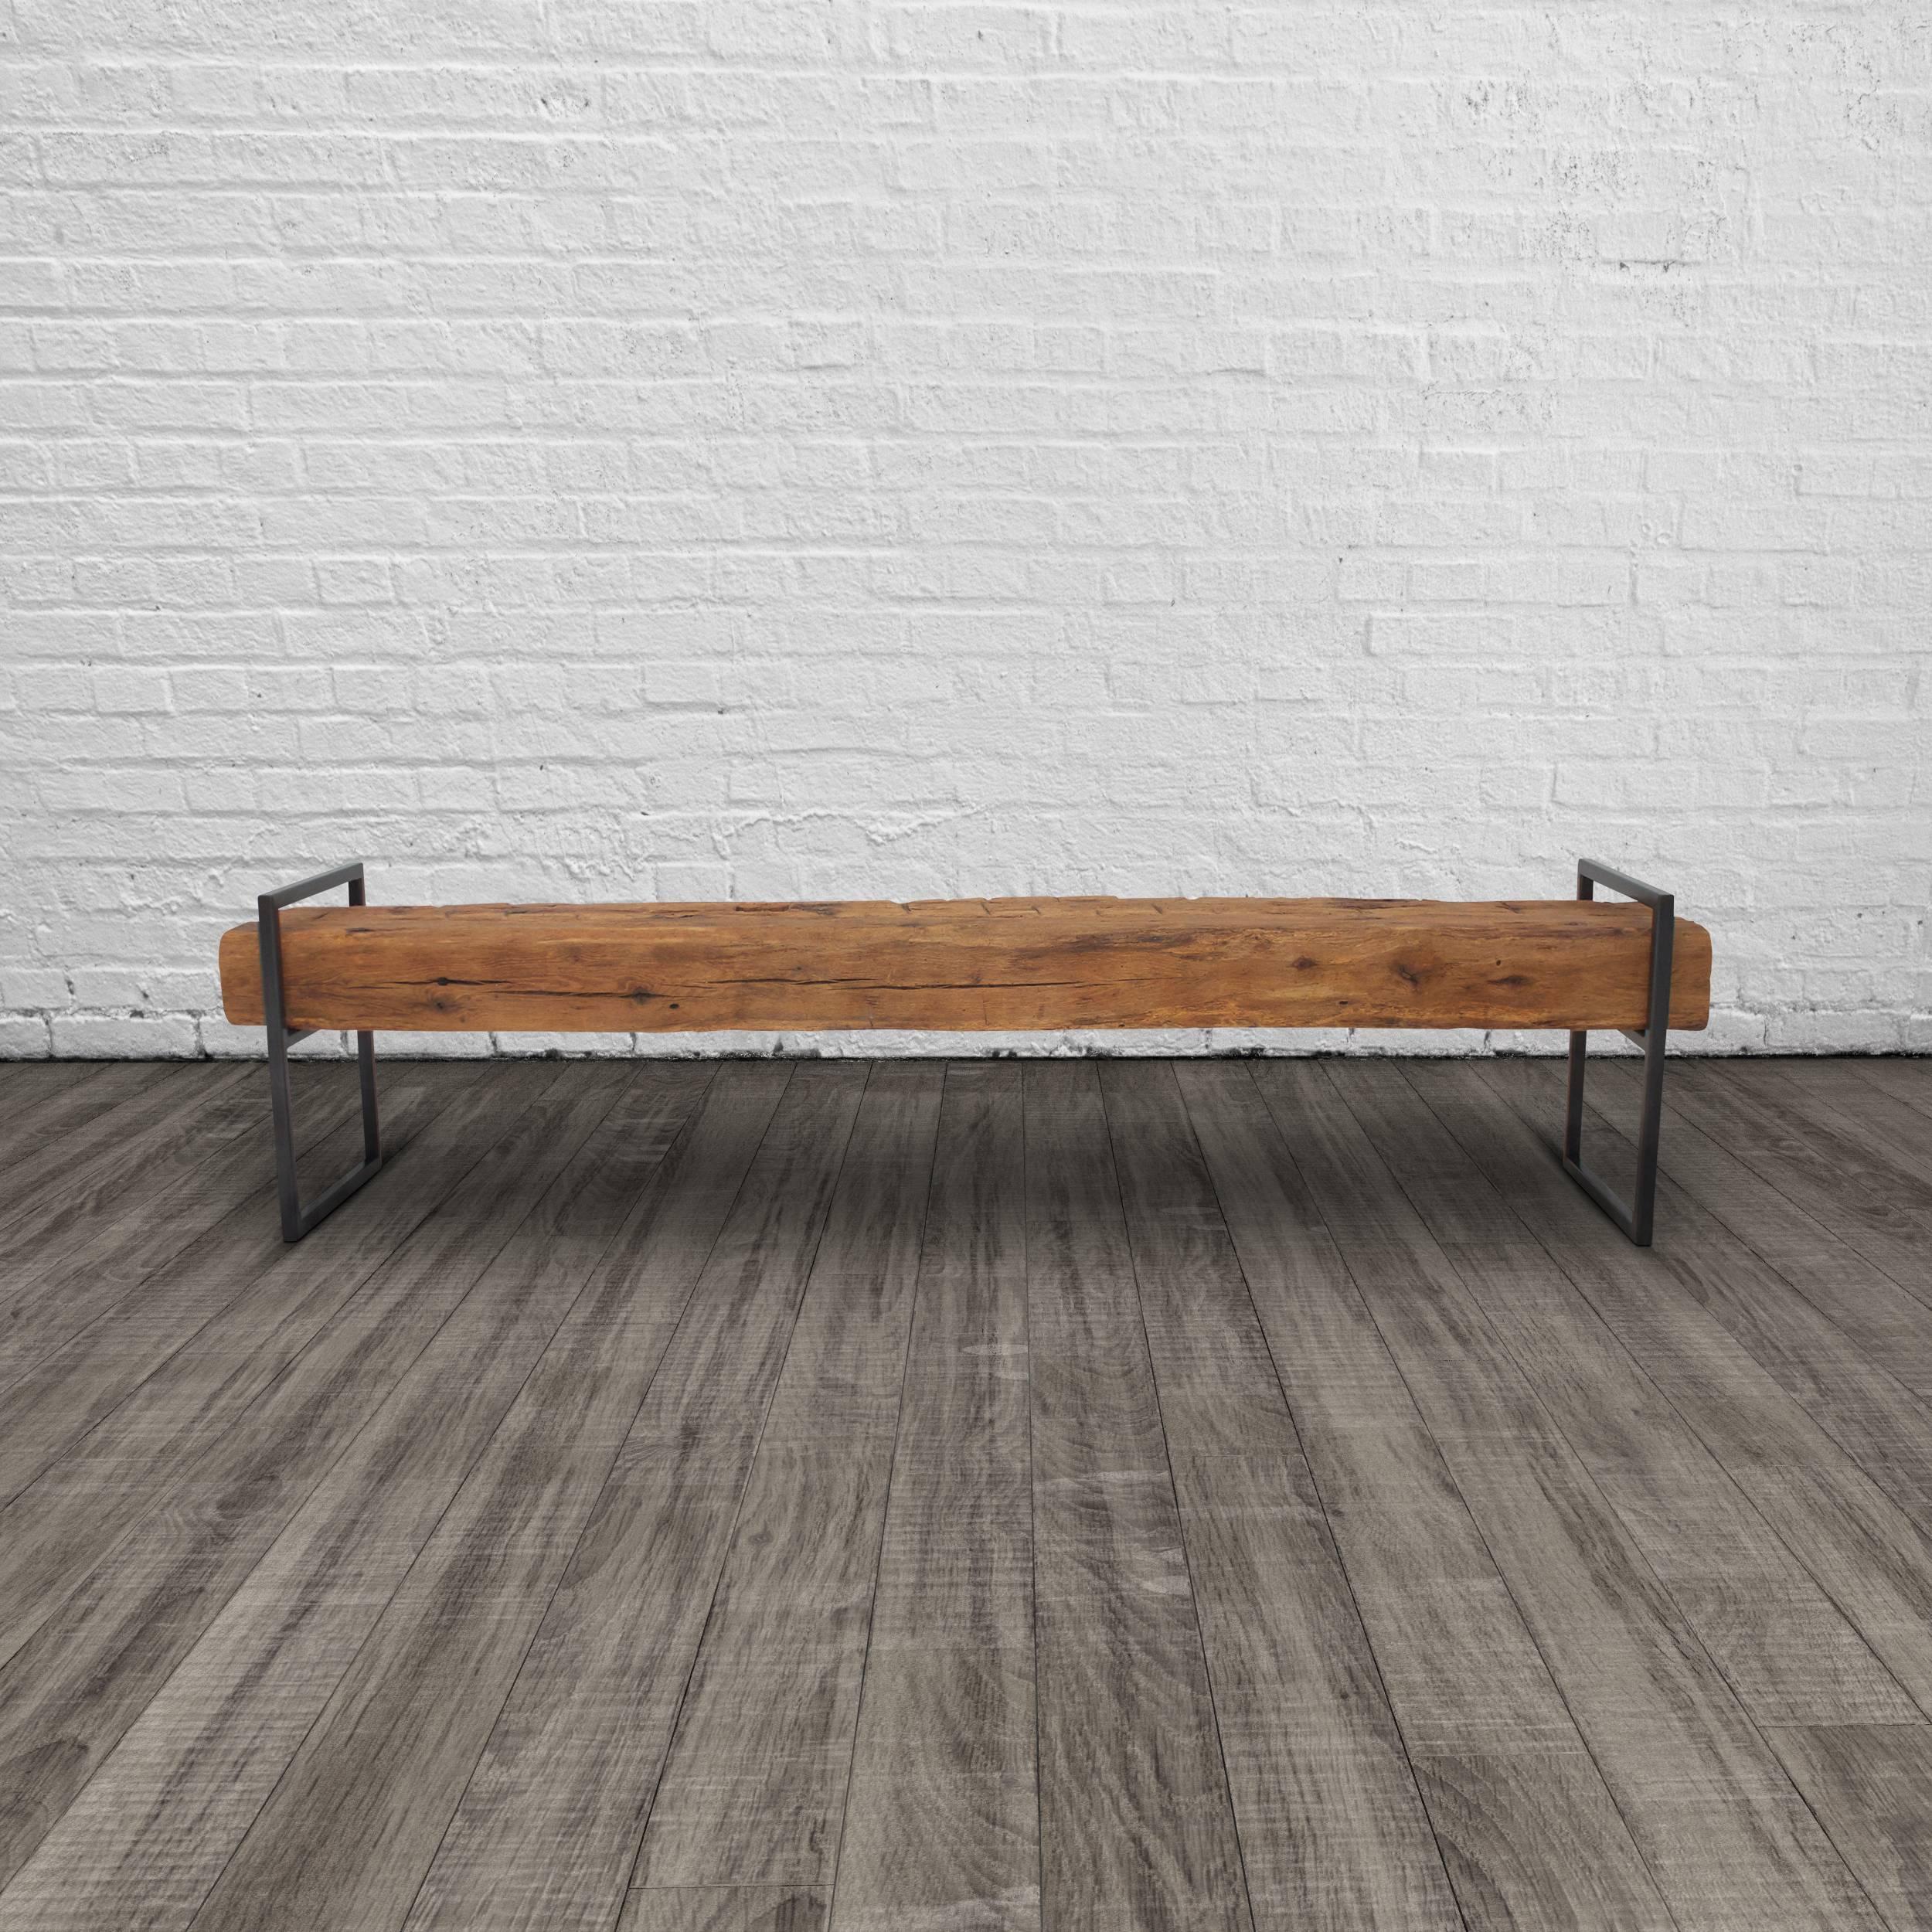 This modern Minimalist bench is constructed from two structural oak beams that appear to float upon a welded steel frame. These historic beams were salvaged from a Bed-Stuy brownstone during demolition, likely dating from the 1860's the character of